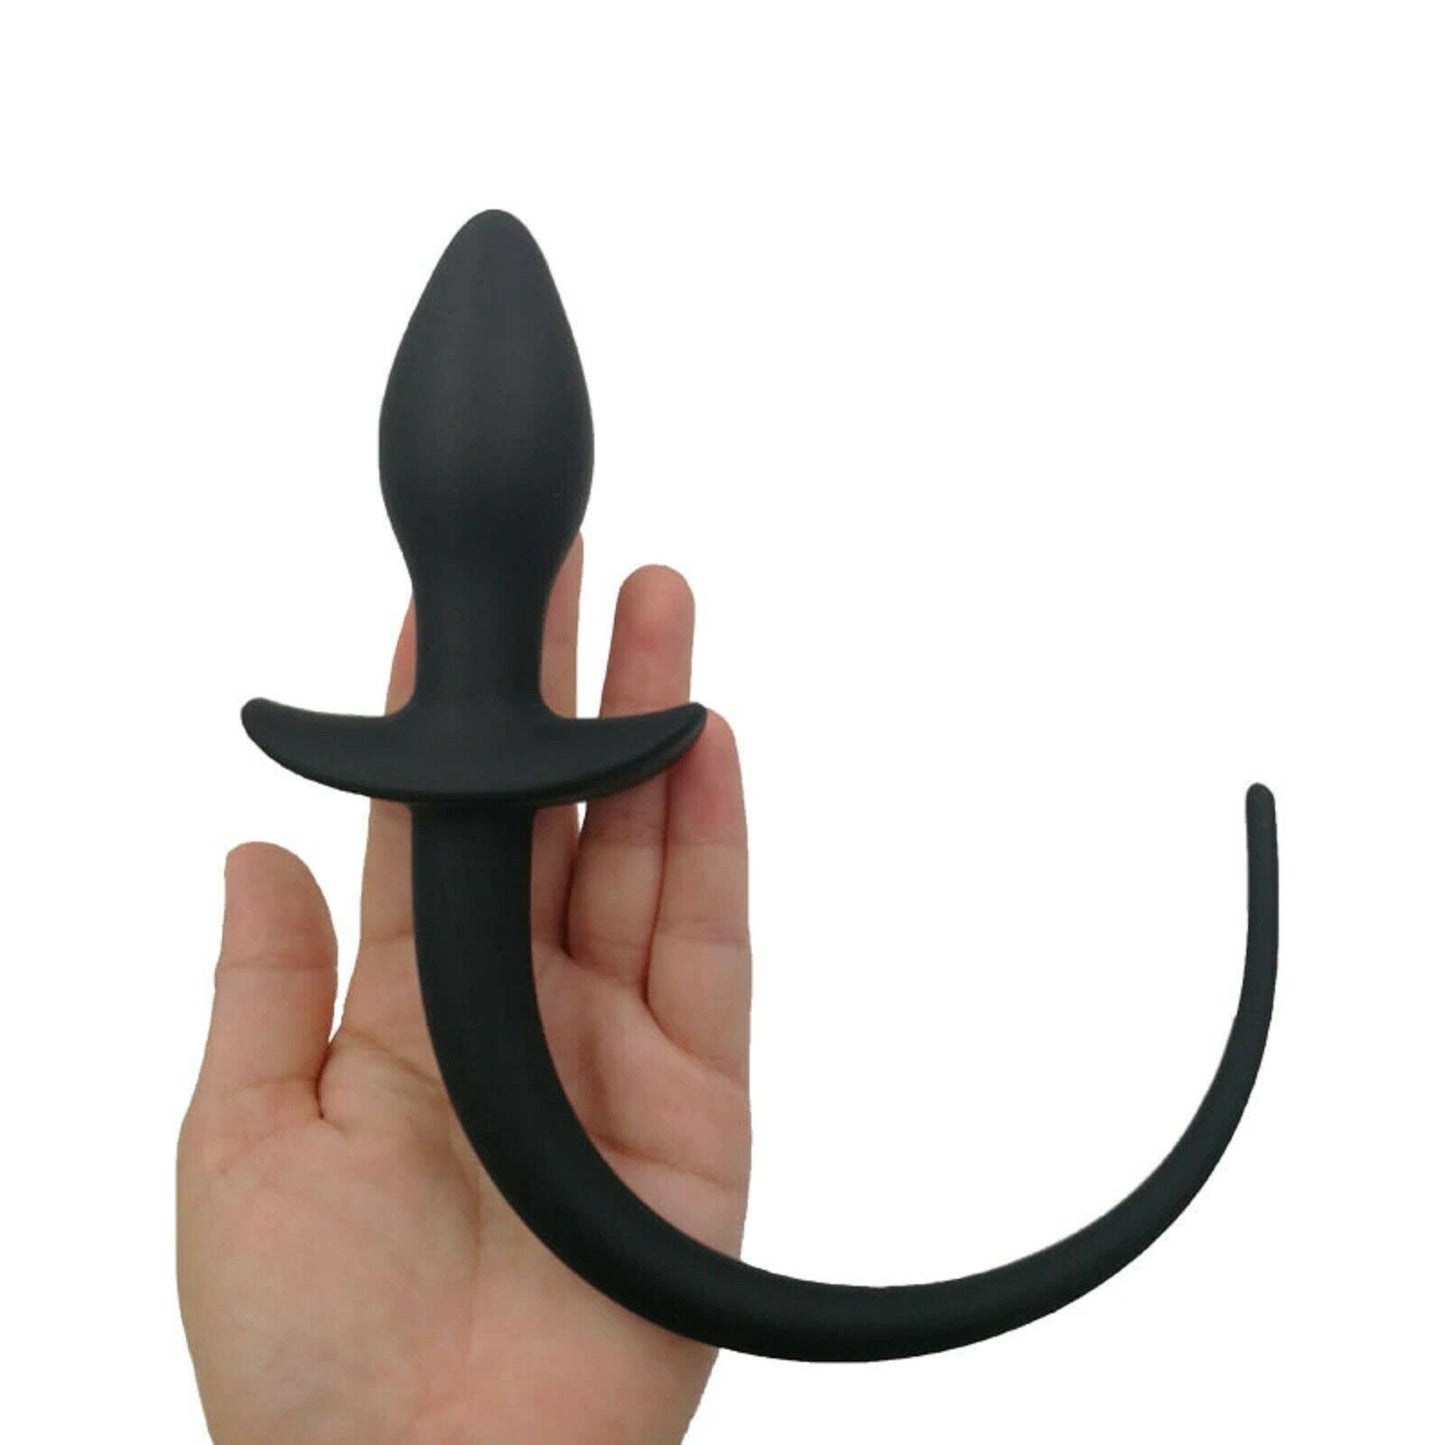 Anal Butt Plug Beads Dog Tail Pup Puppy Play Kink Sub BDSM Silicone Gay Sex Toy